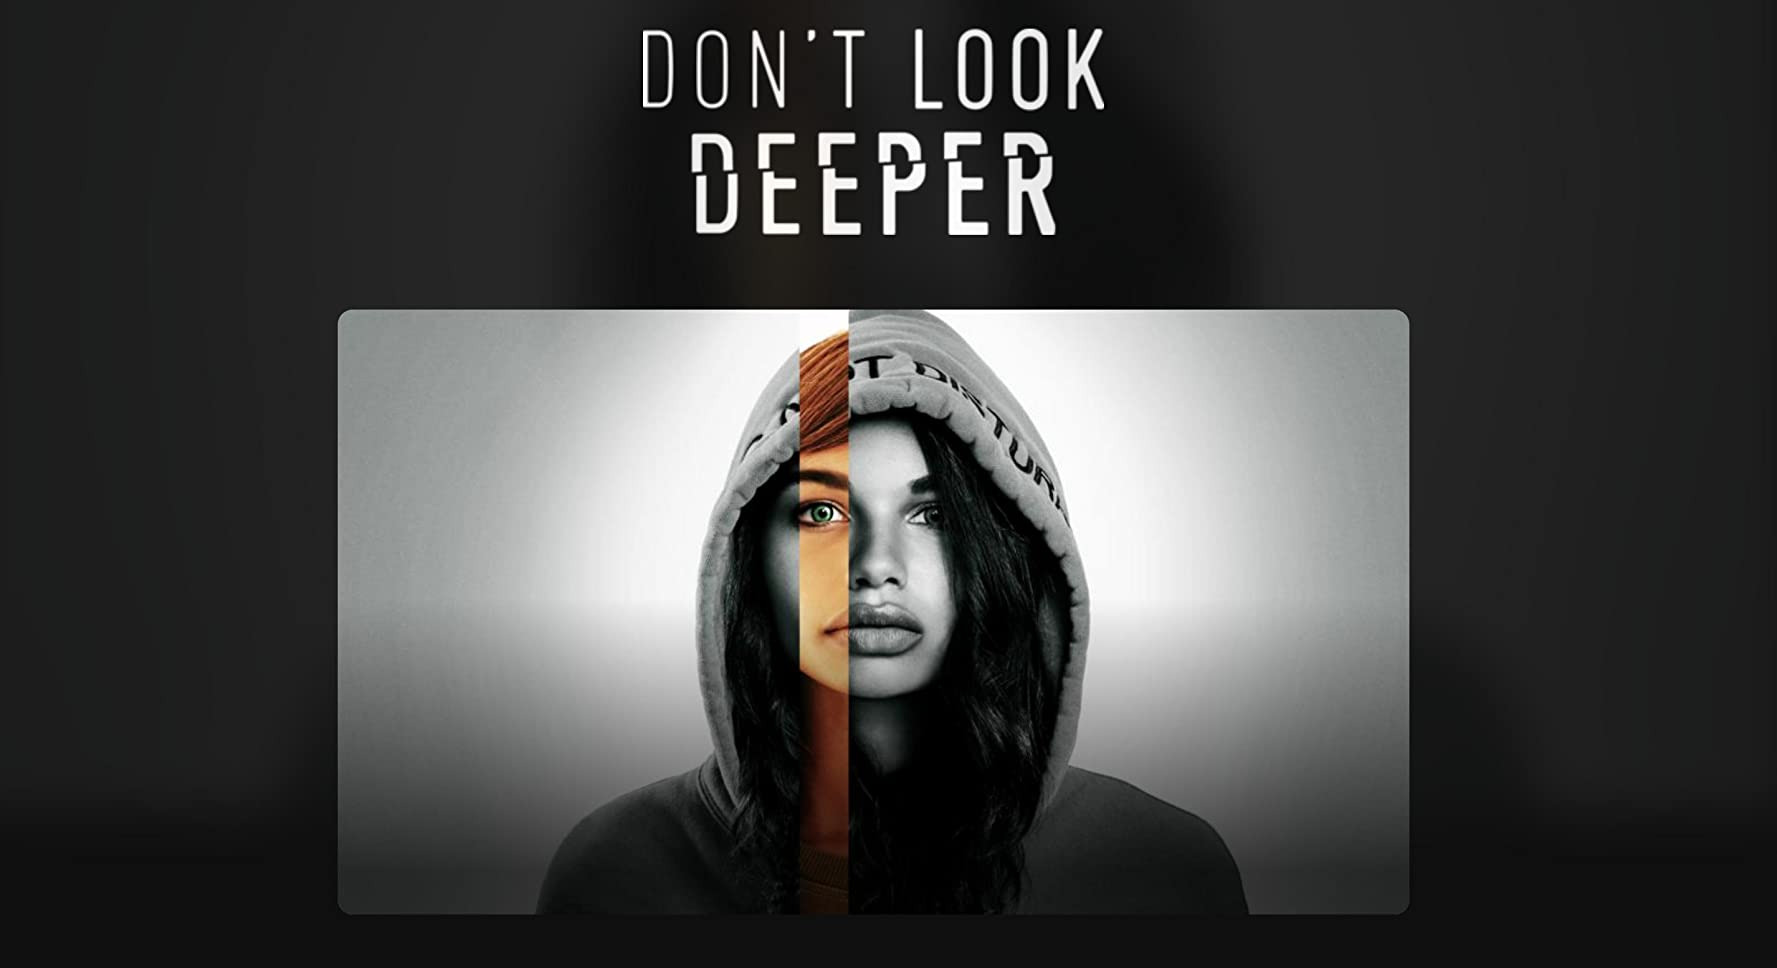 Show Don't Look Deeper